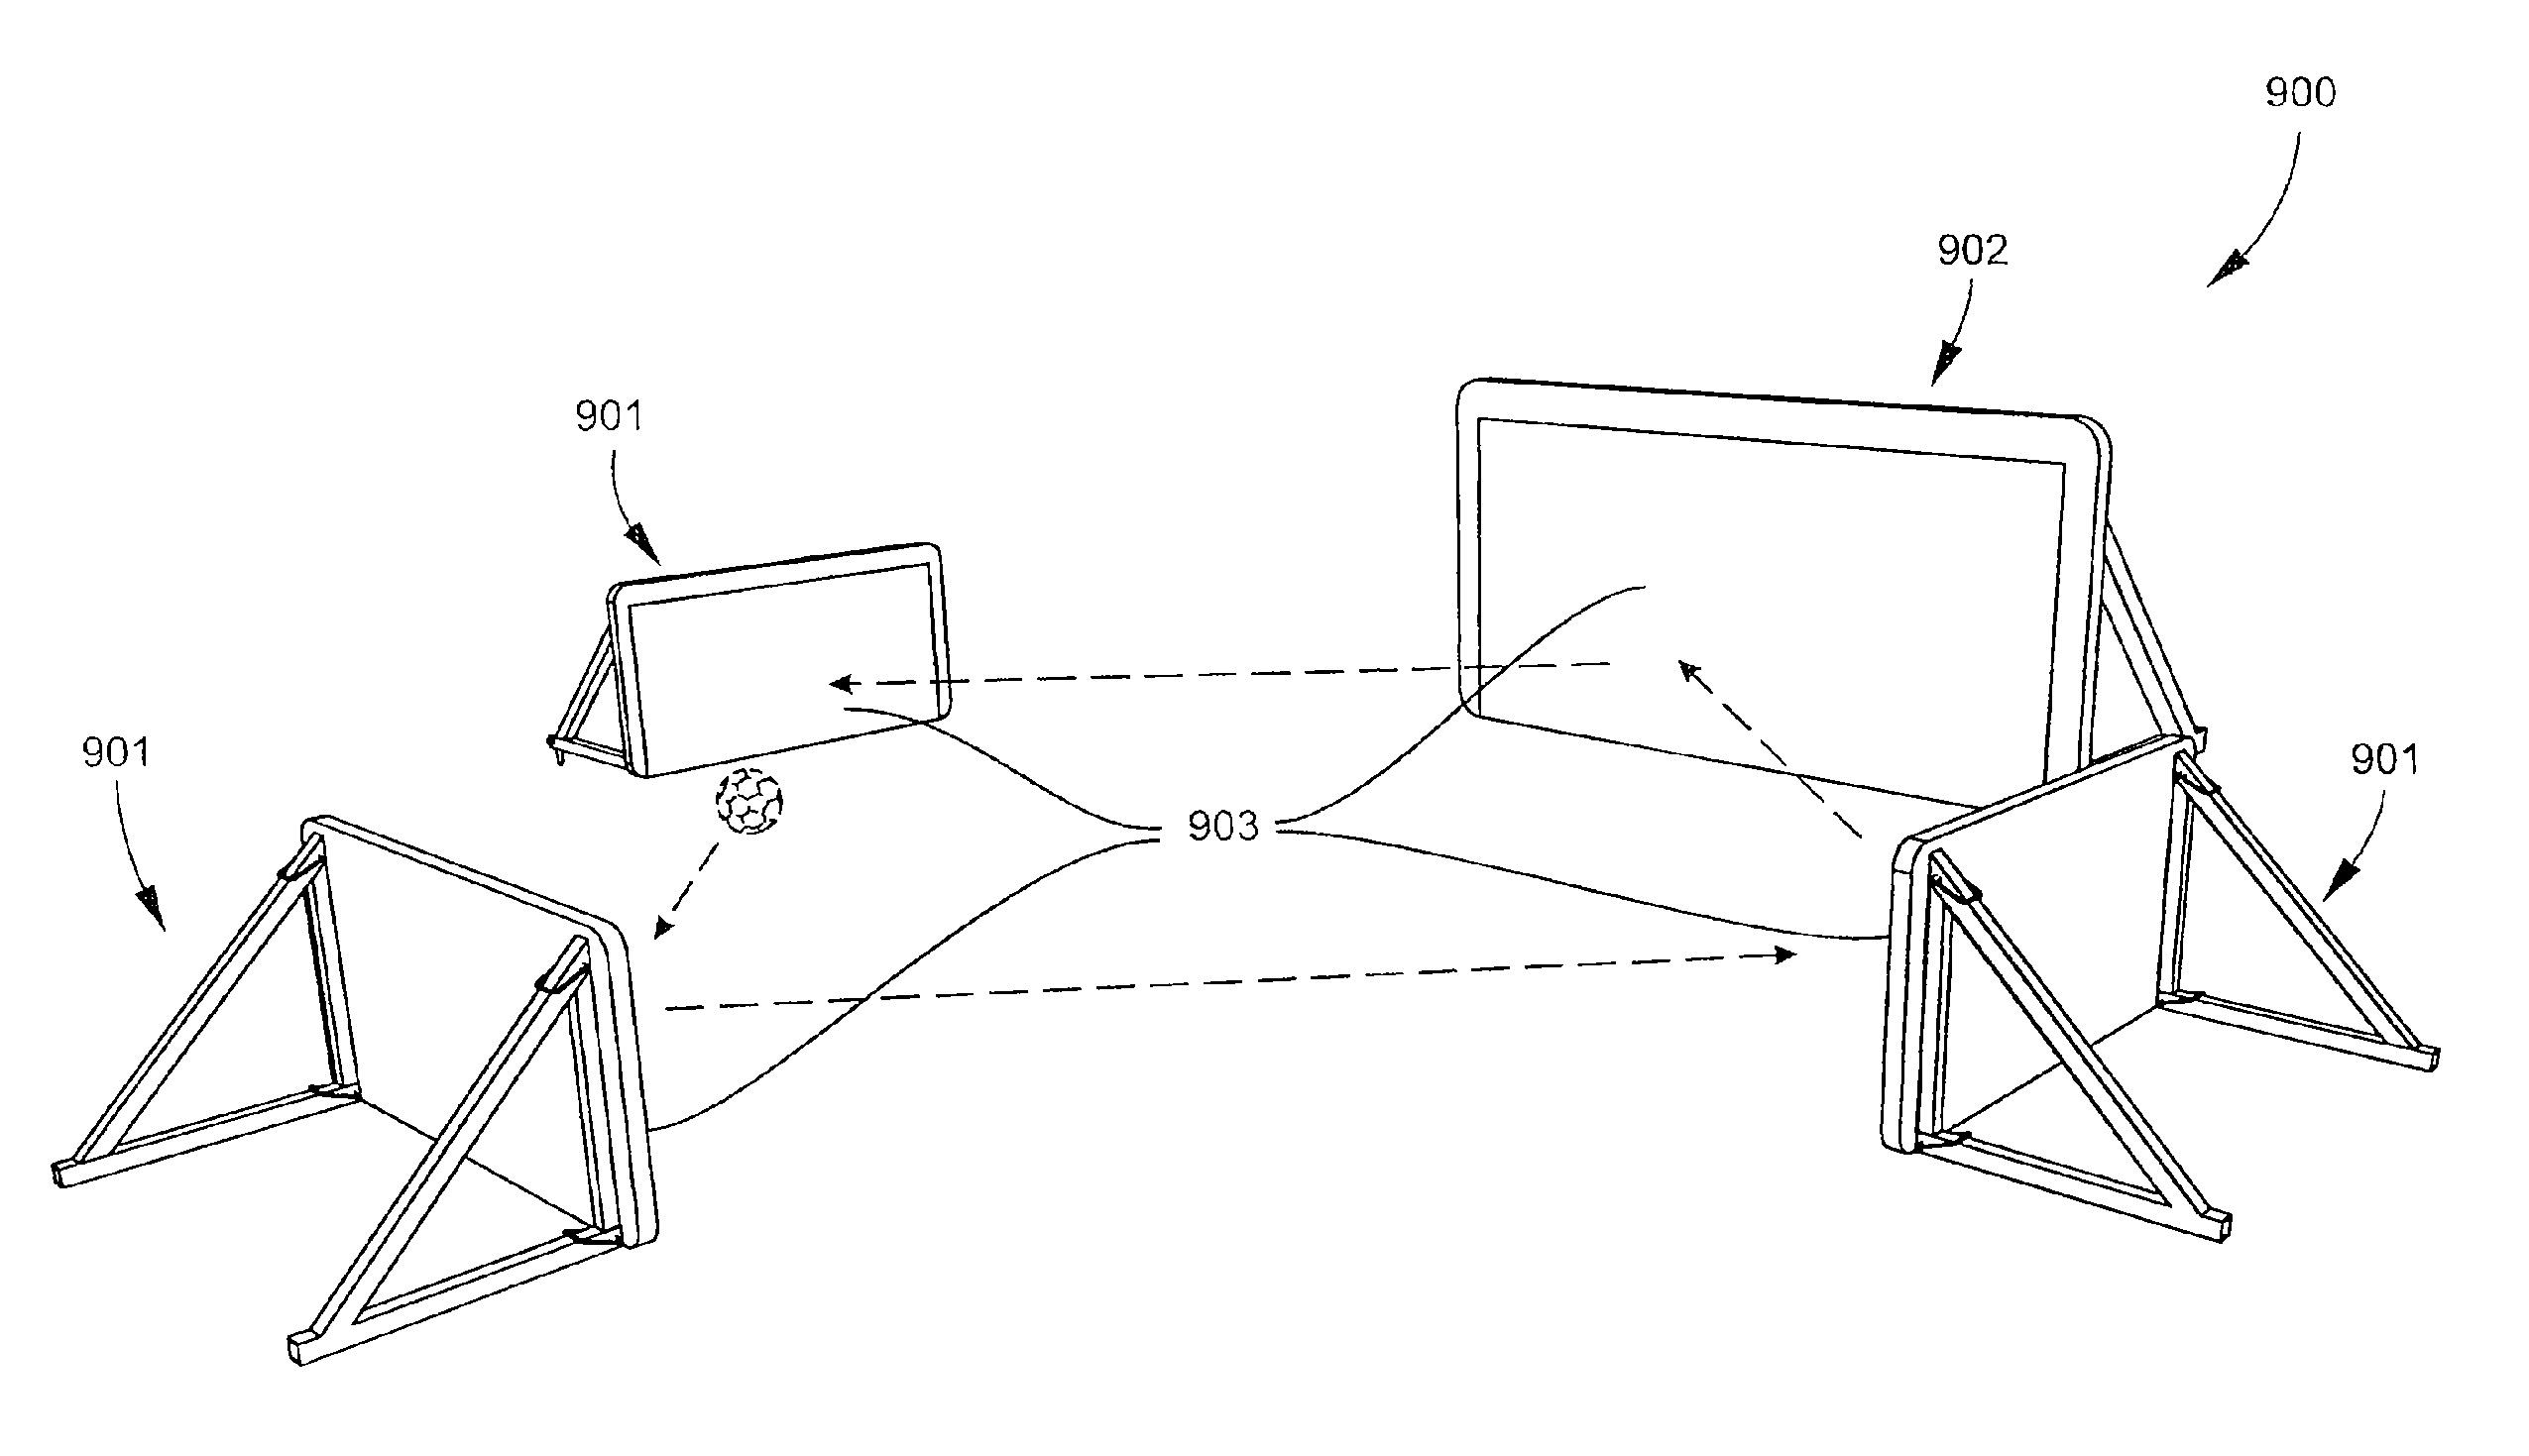 Soccer training device, method of use and system